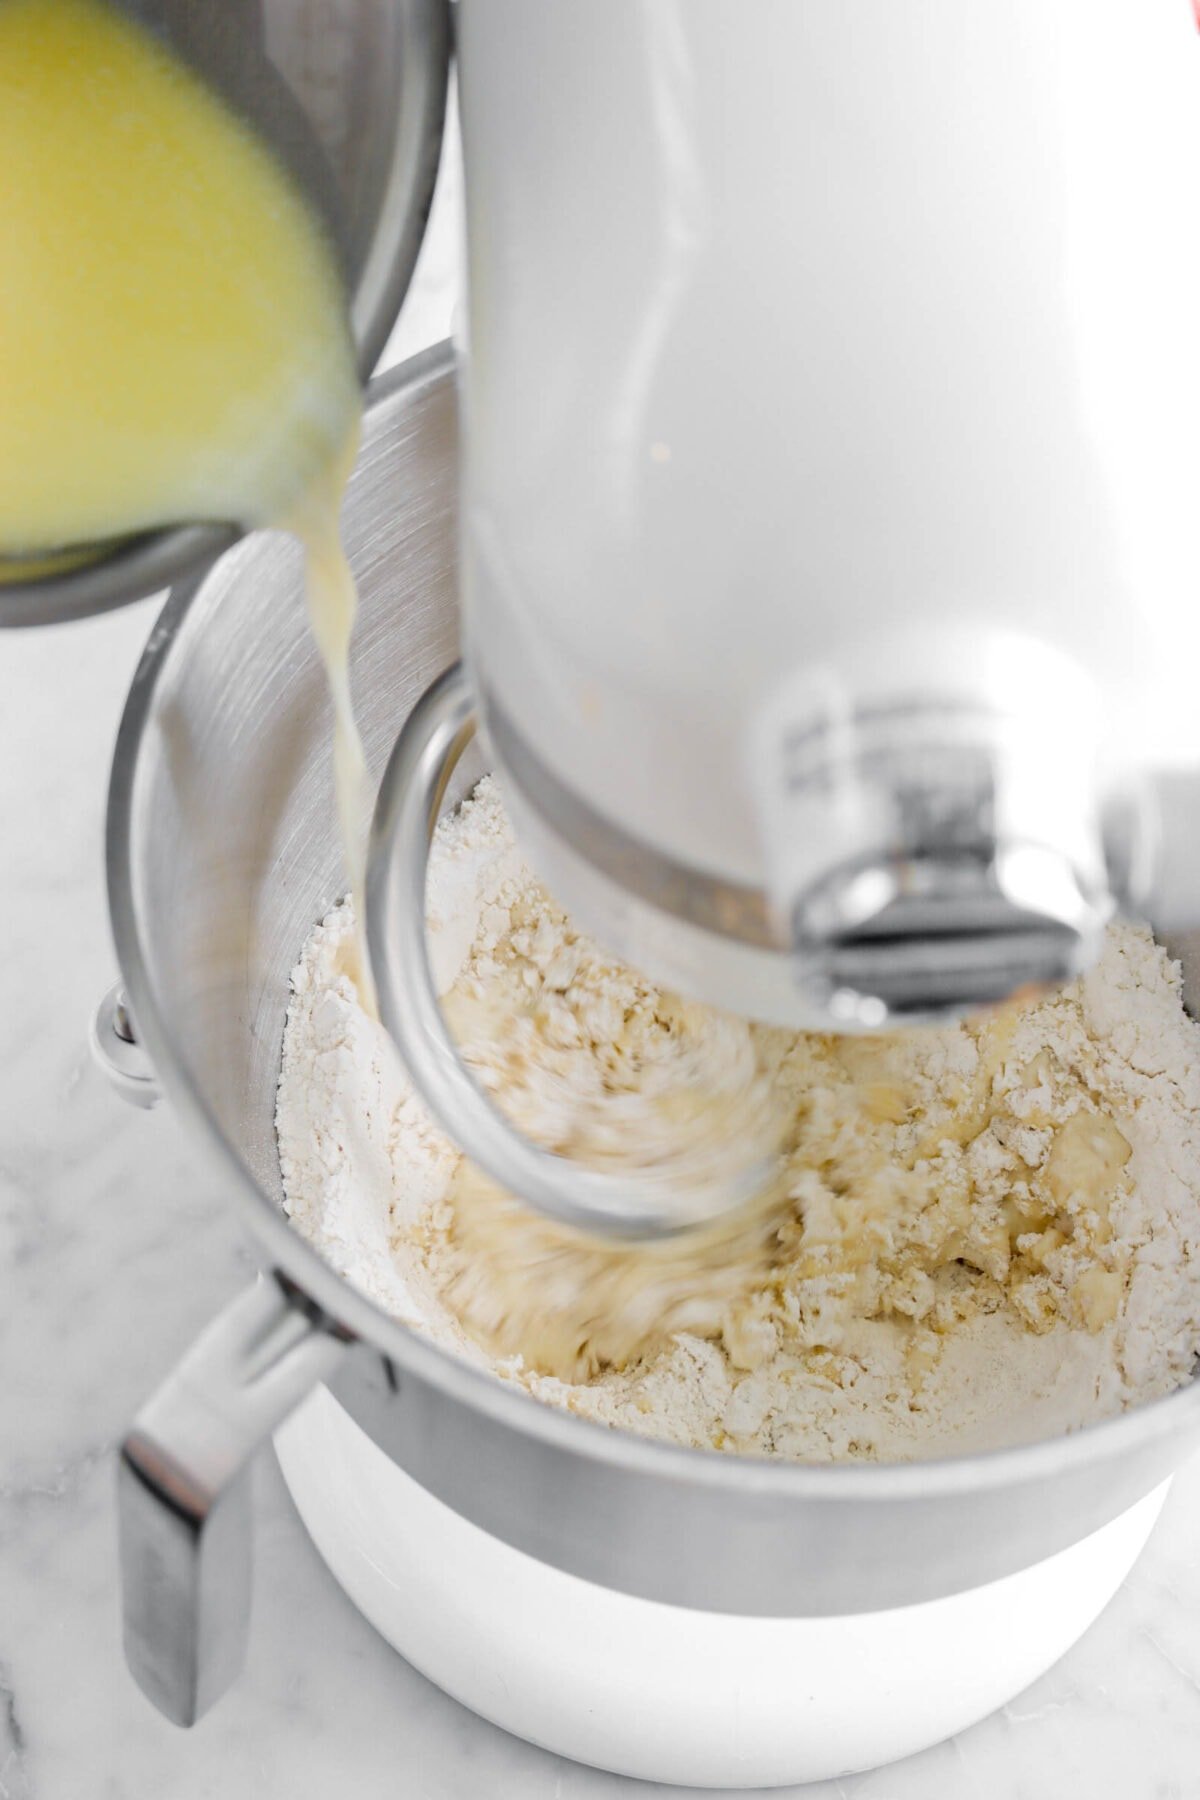 melted butter and milk mixture being poured into dry ingredients with mixer running.